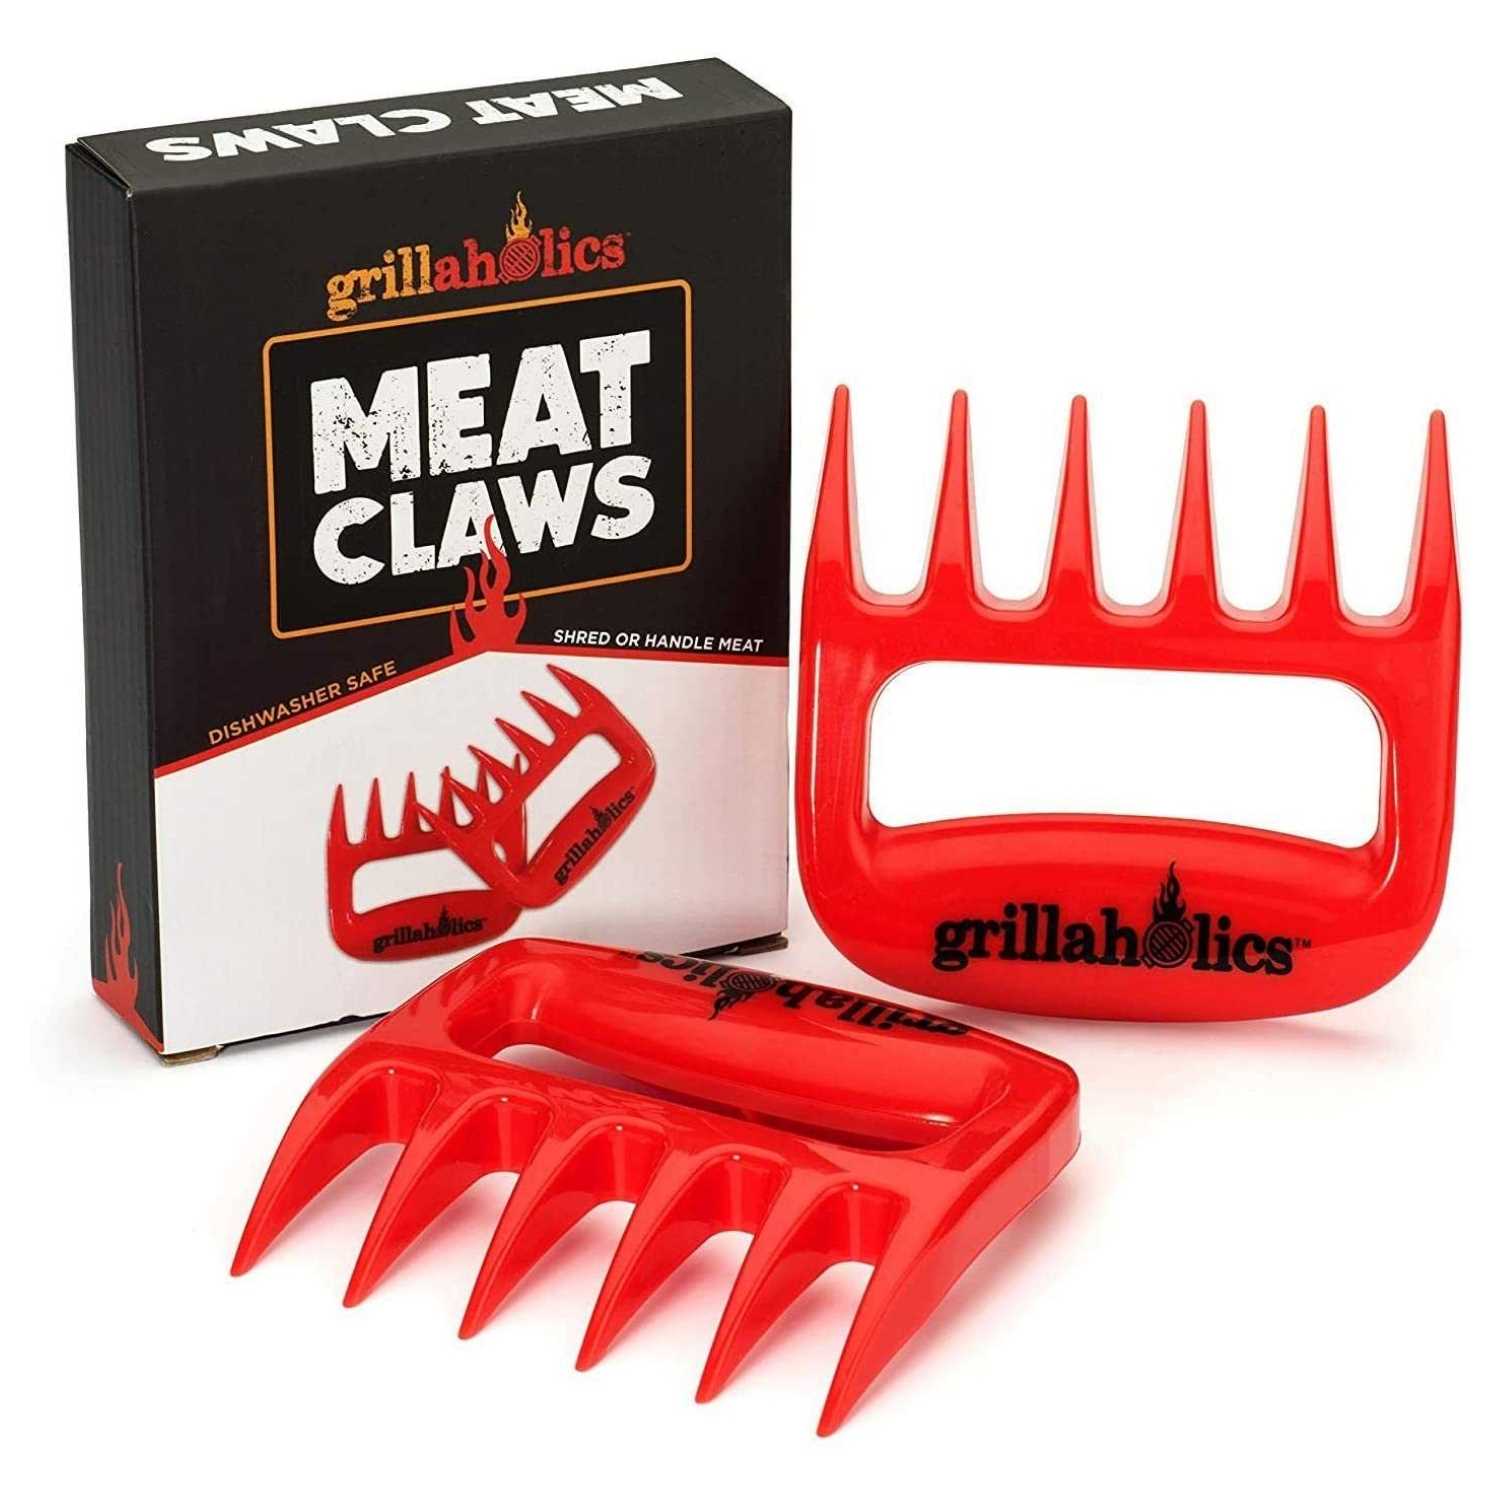 meat claws meat shredder Meat SHREDZ BBQ Shredder smoker accessories gifts gadgets under 15 grilling gadgets/tools/utensils for men best gifts for foodies men meat shredder bear claw 